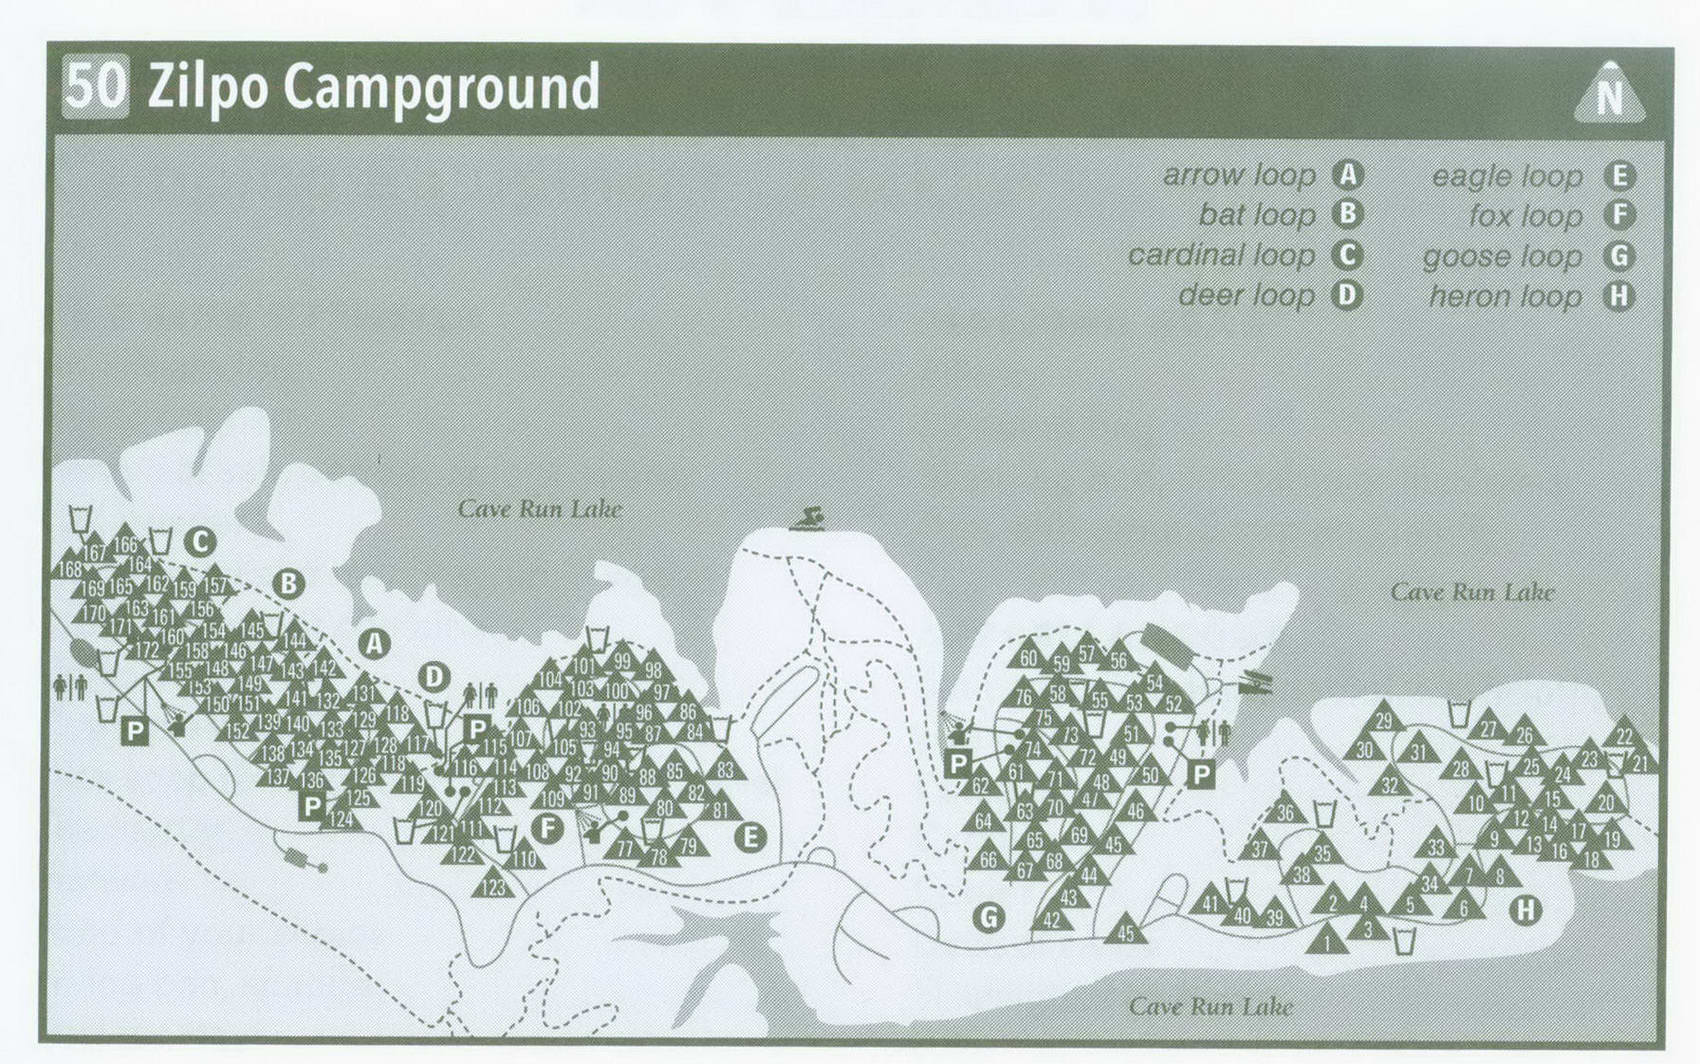 Plan of Zilpo Campground